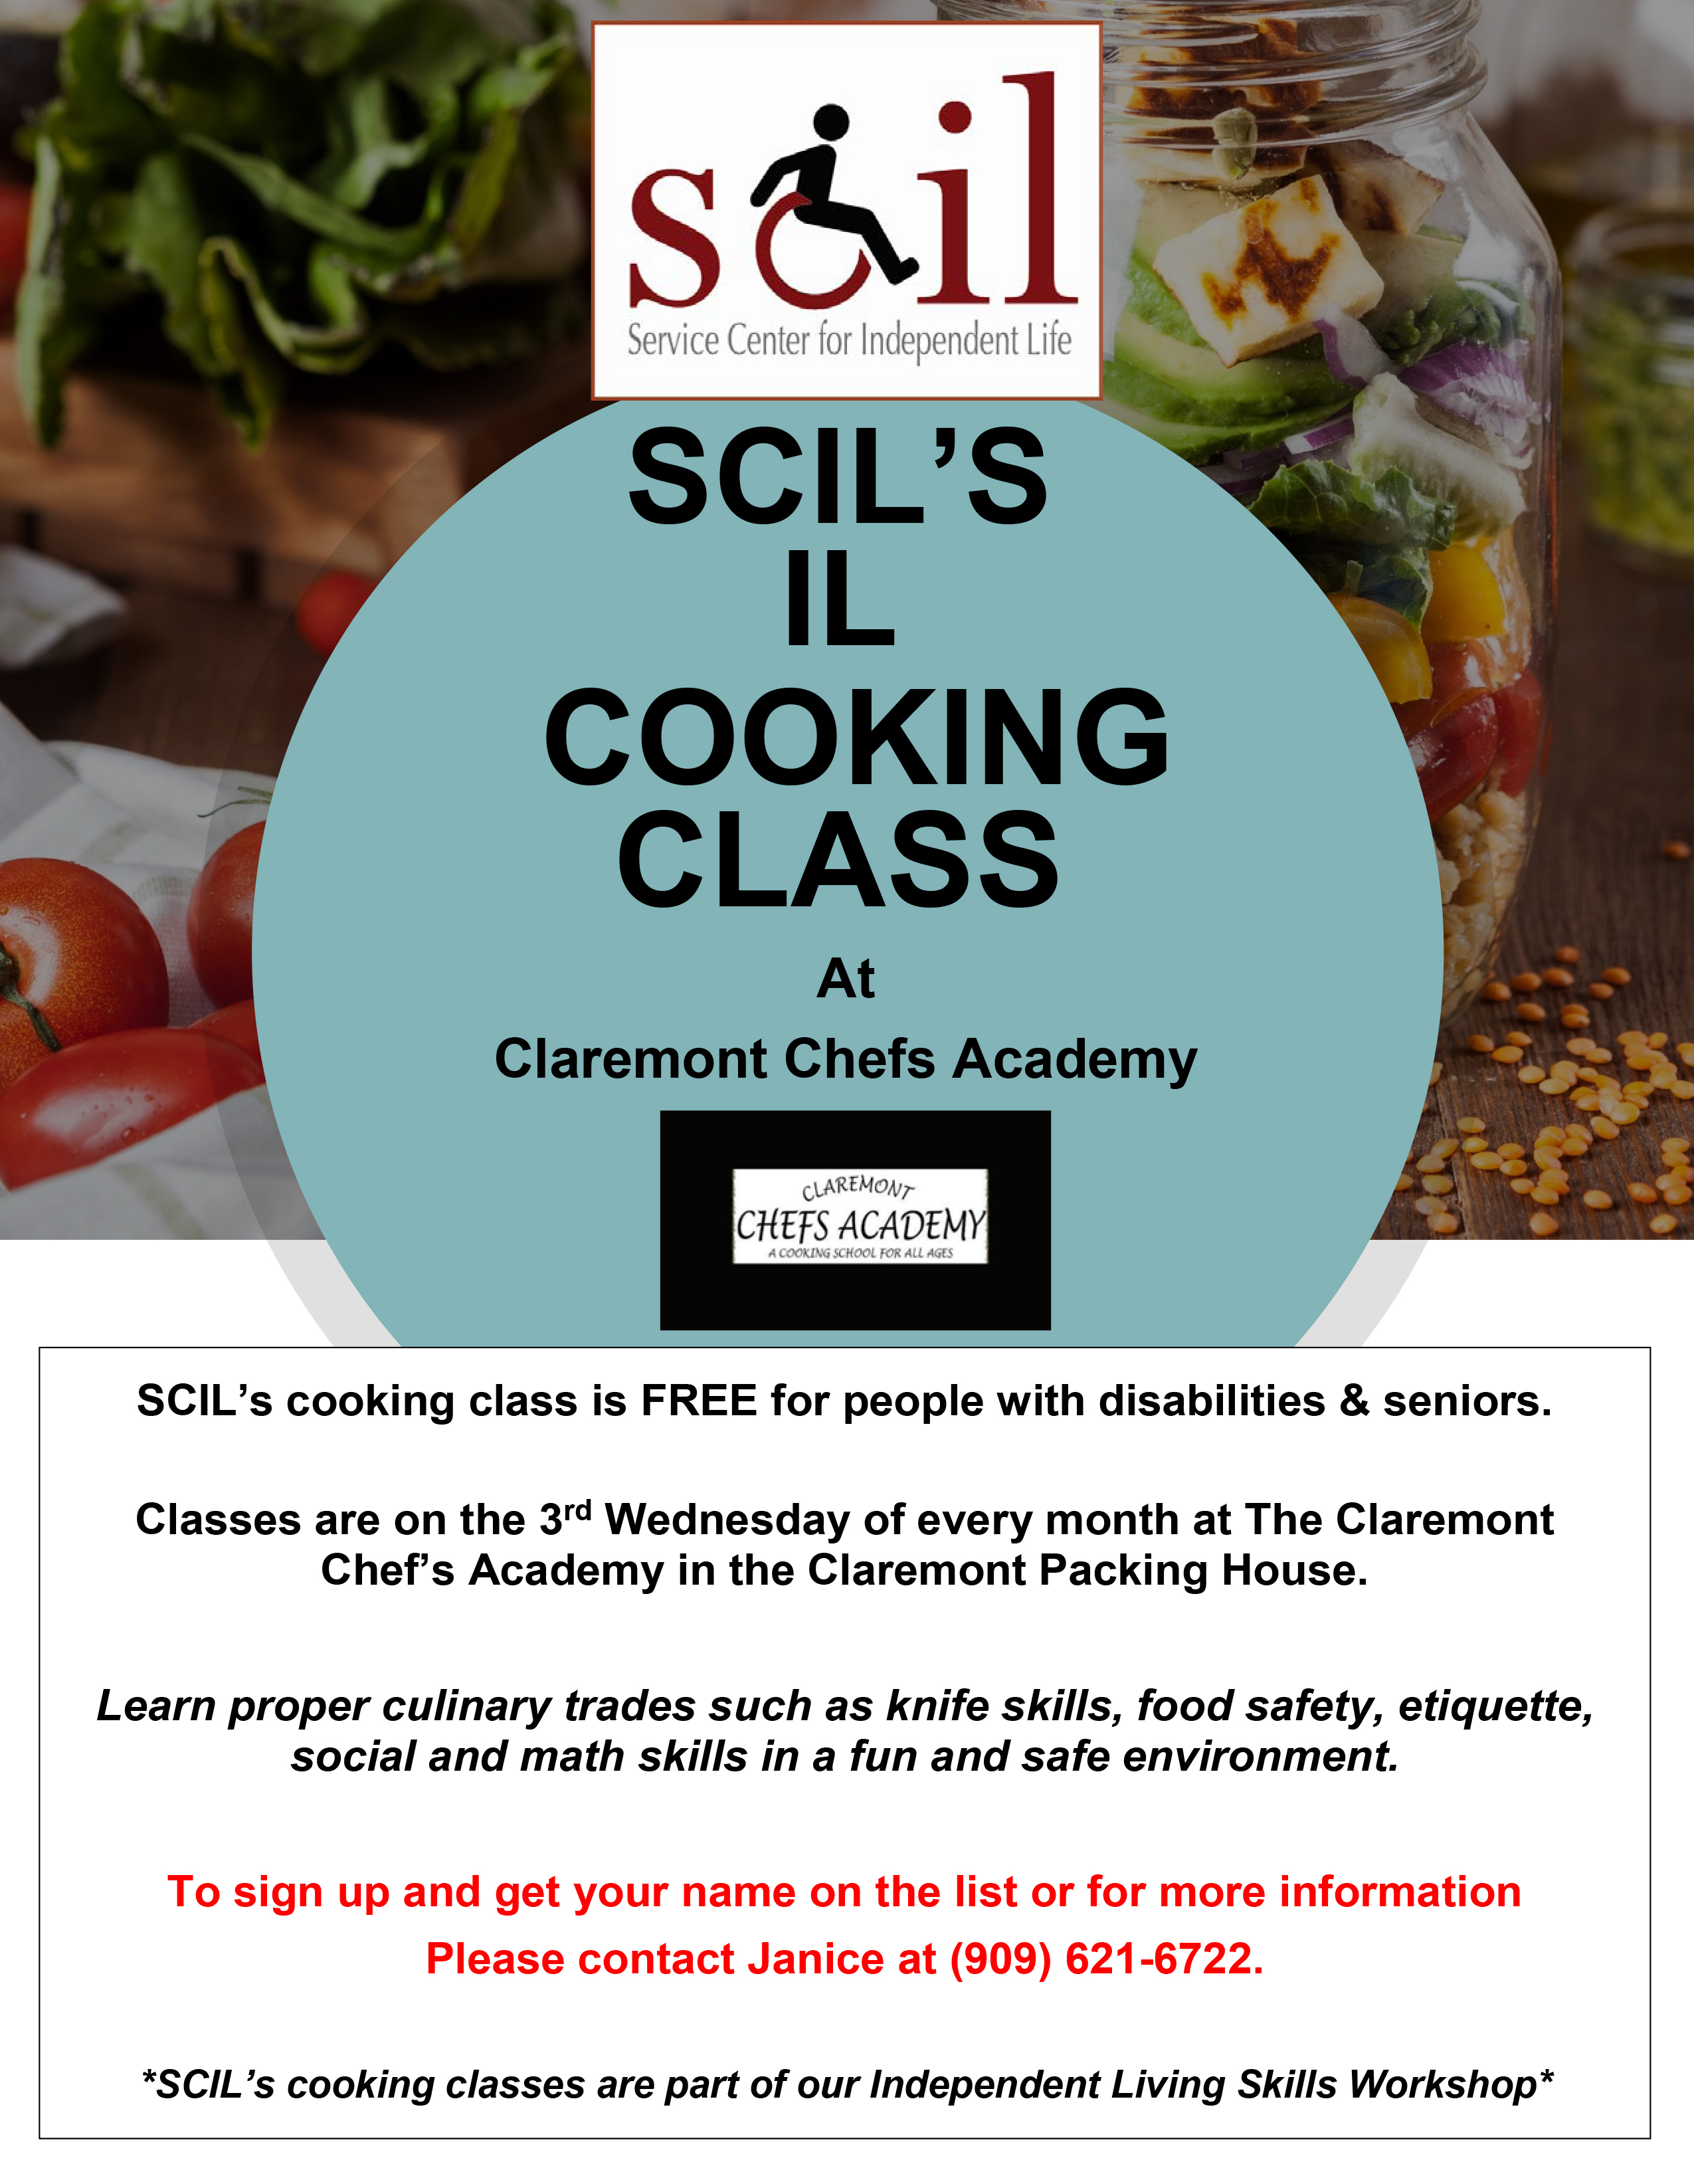 cooking class - 3rd wednesday of every month - call janice for more info - (909) 621-6722